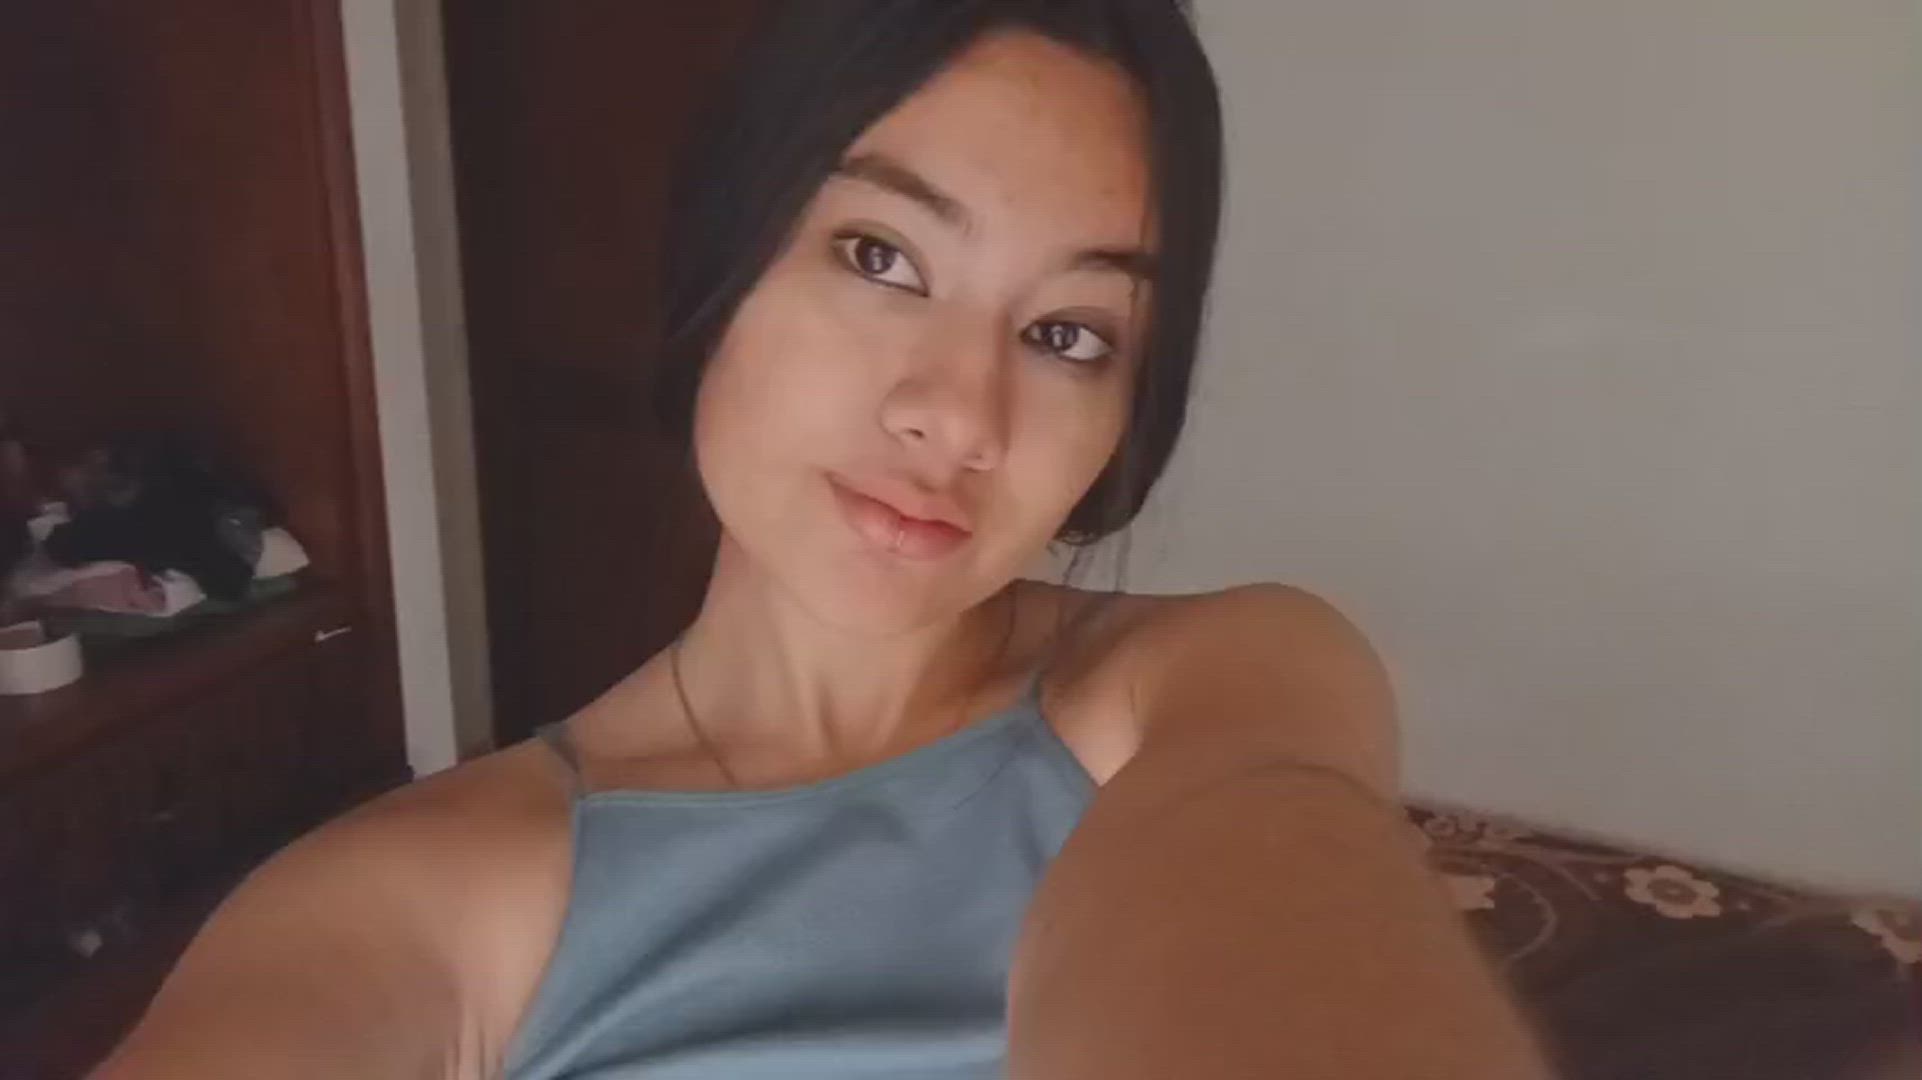 Amateur porn video with onlyfans model paulace <strong>@paula_ce03</strong>